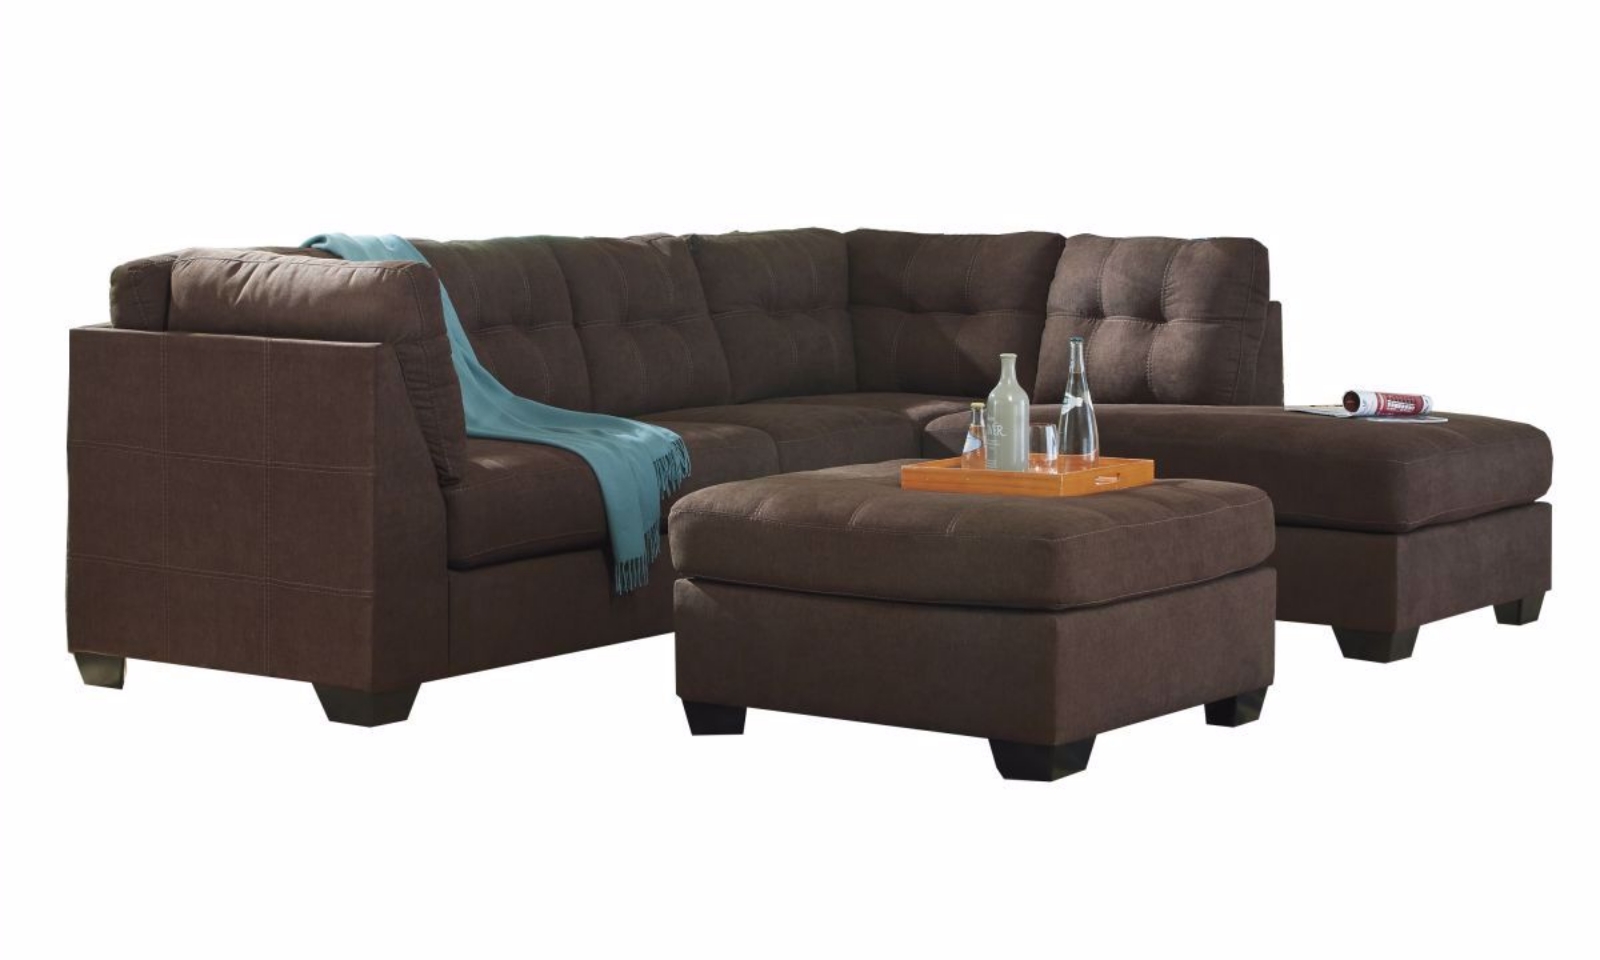 Picture of Maier Sectional with Ottoman